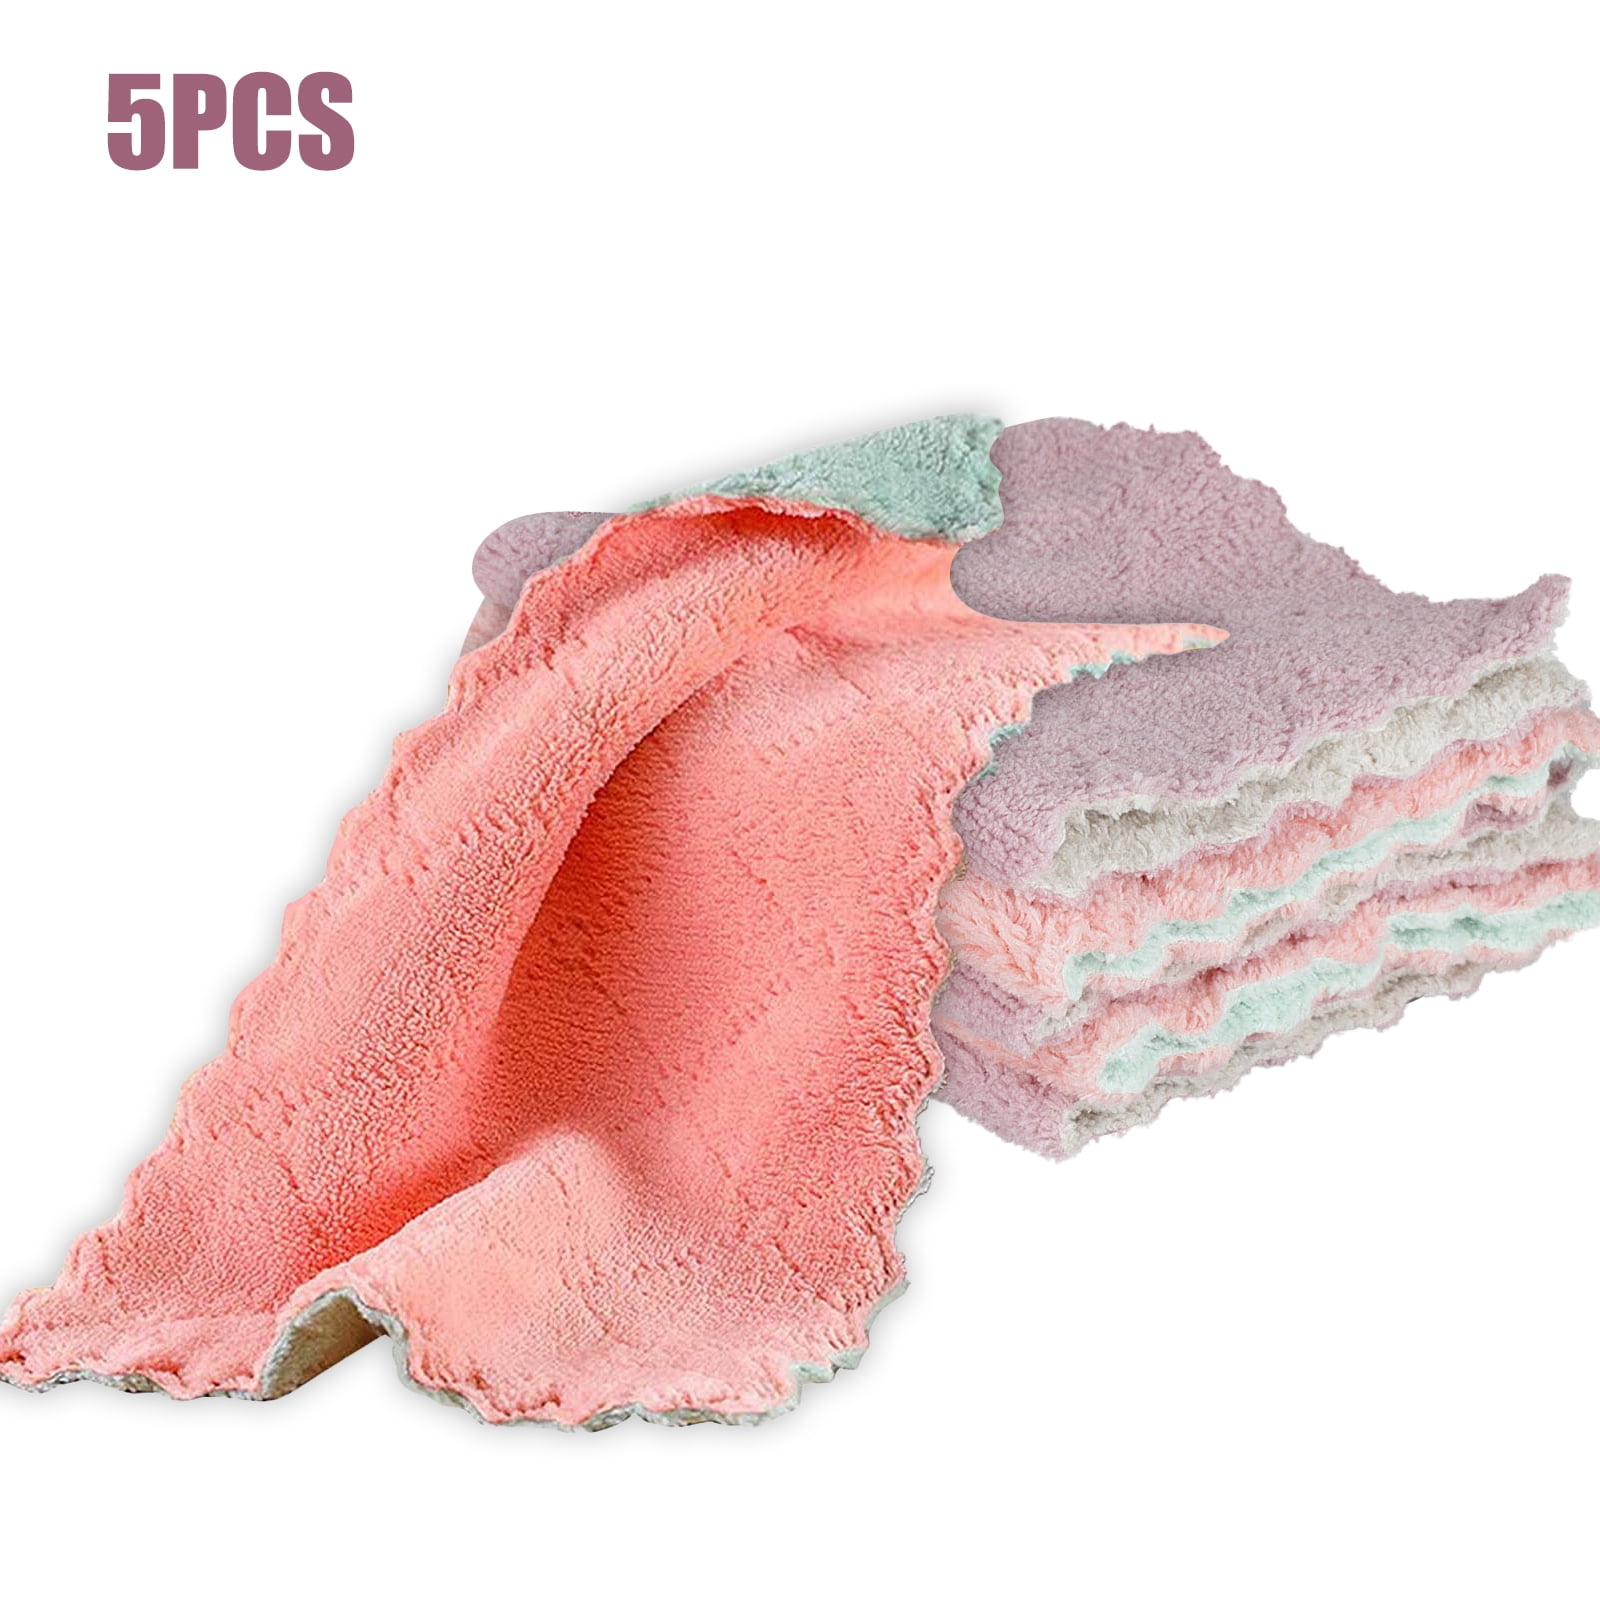 5pcs Super Absorbent Microfiber Kitchen Cloth Dish Cleaning Towel Household 